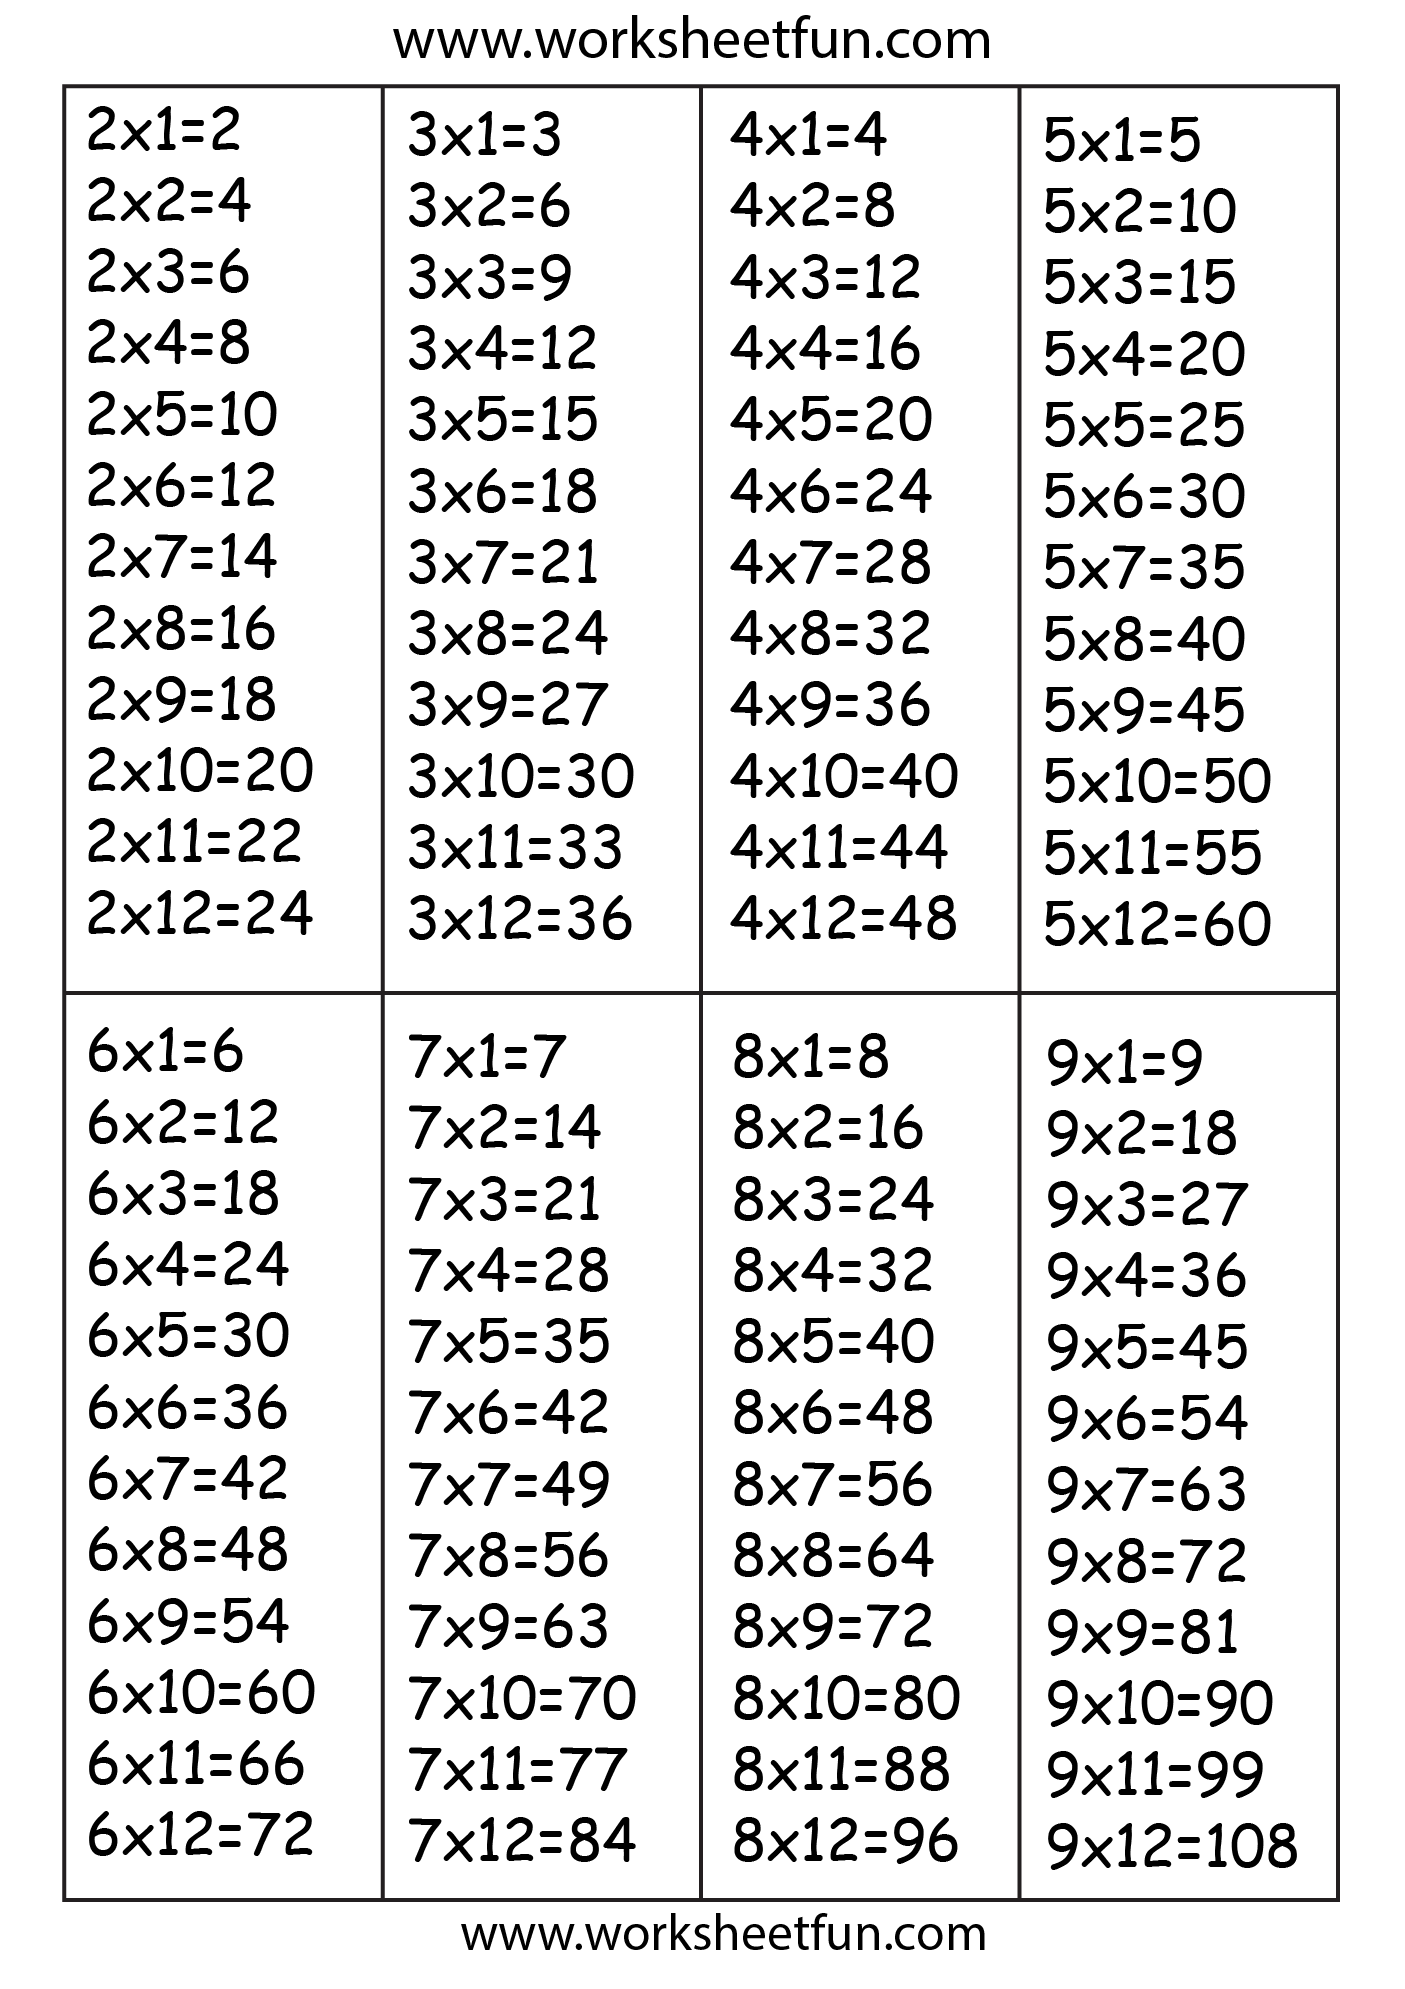 Times Table Chart – 2, 3, 4, 5, 6, 7, 8 &amp;amp; 9 | Times Table